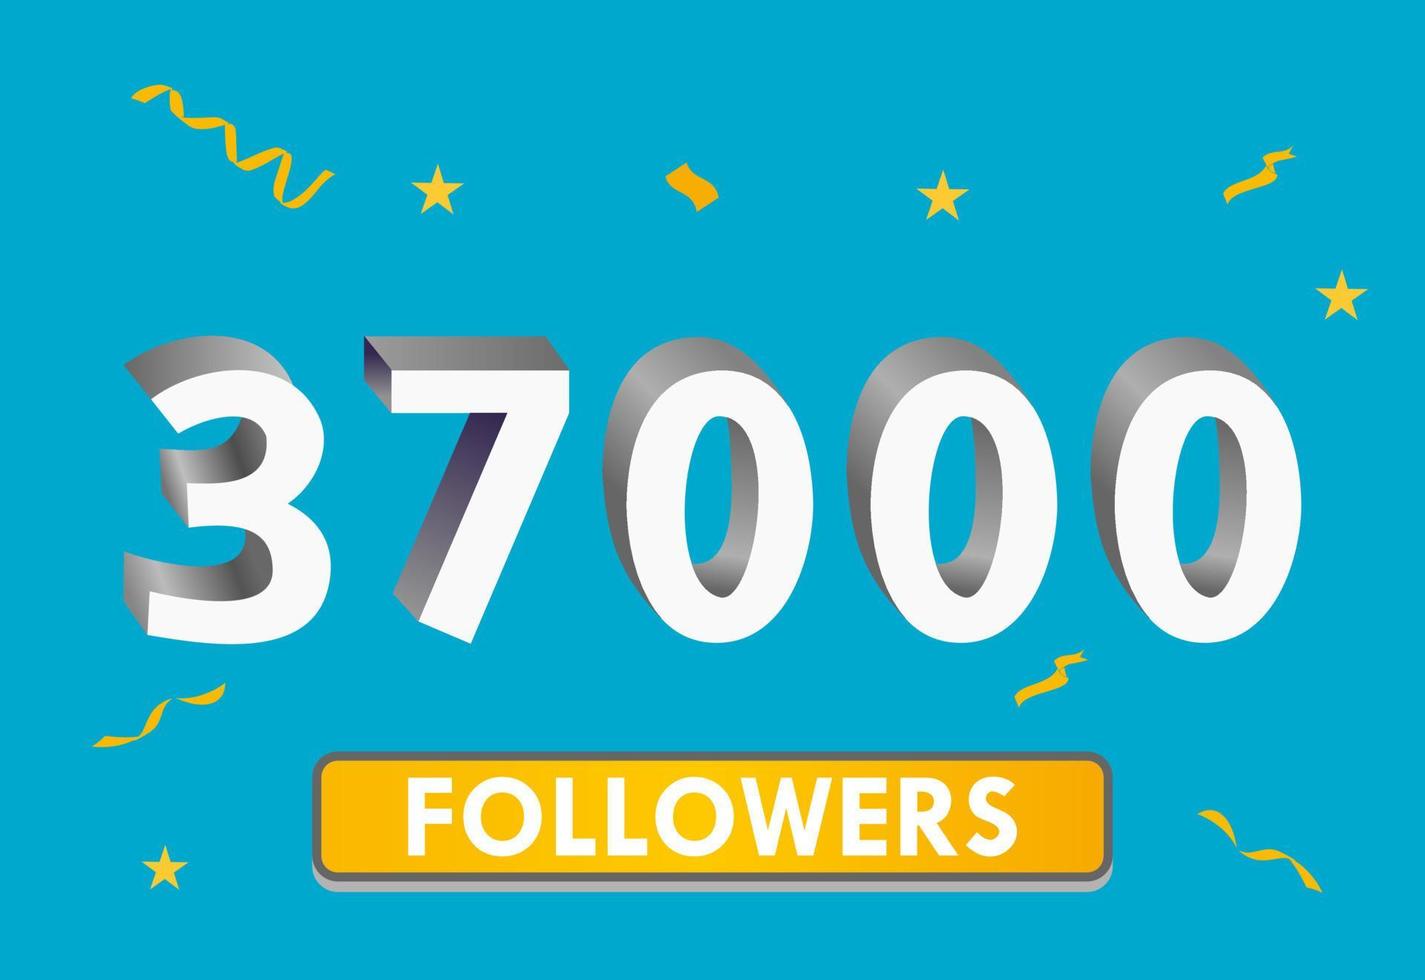 Illustration 3d numbers for social media 37k likes thanks, celebrating subscribers fans. Banner with 37000 followers vector